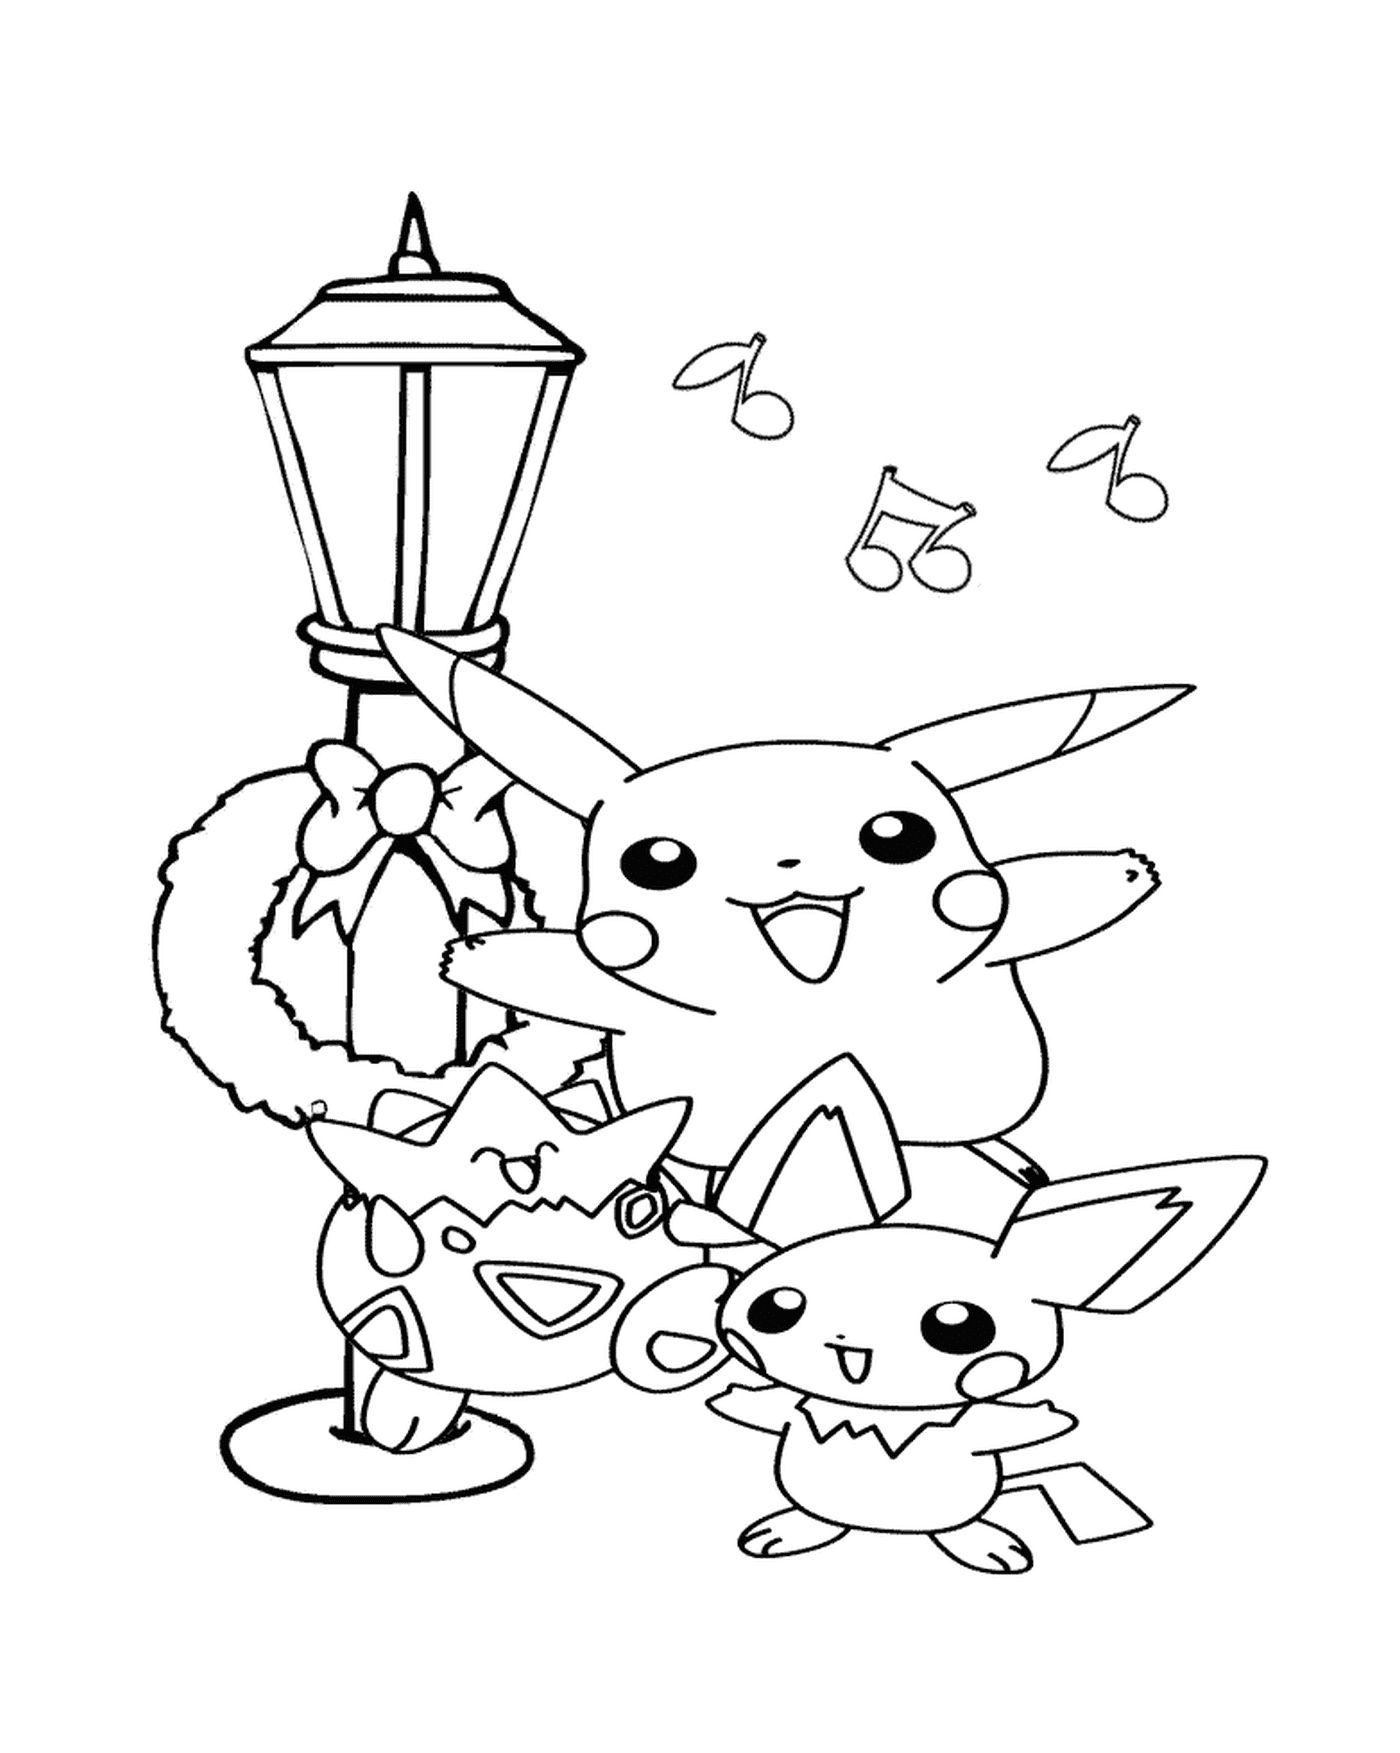  Pikachu and his friends sing 